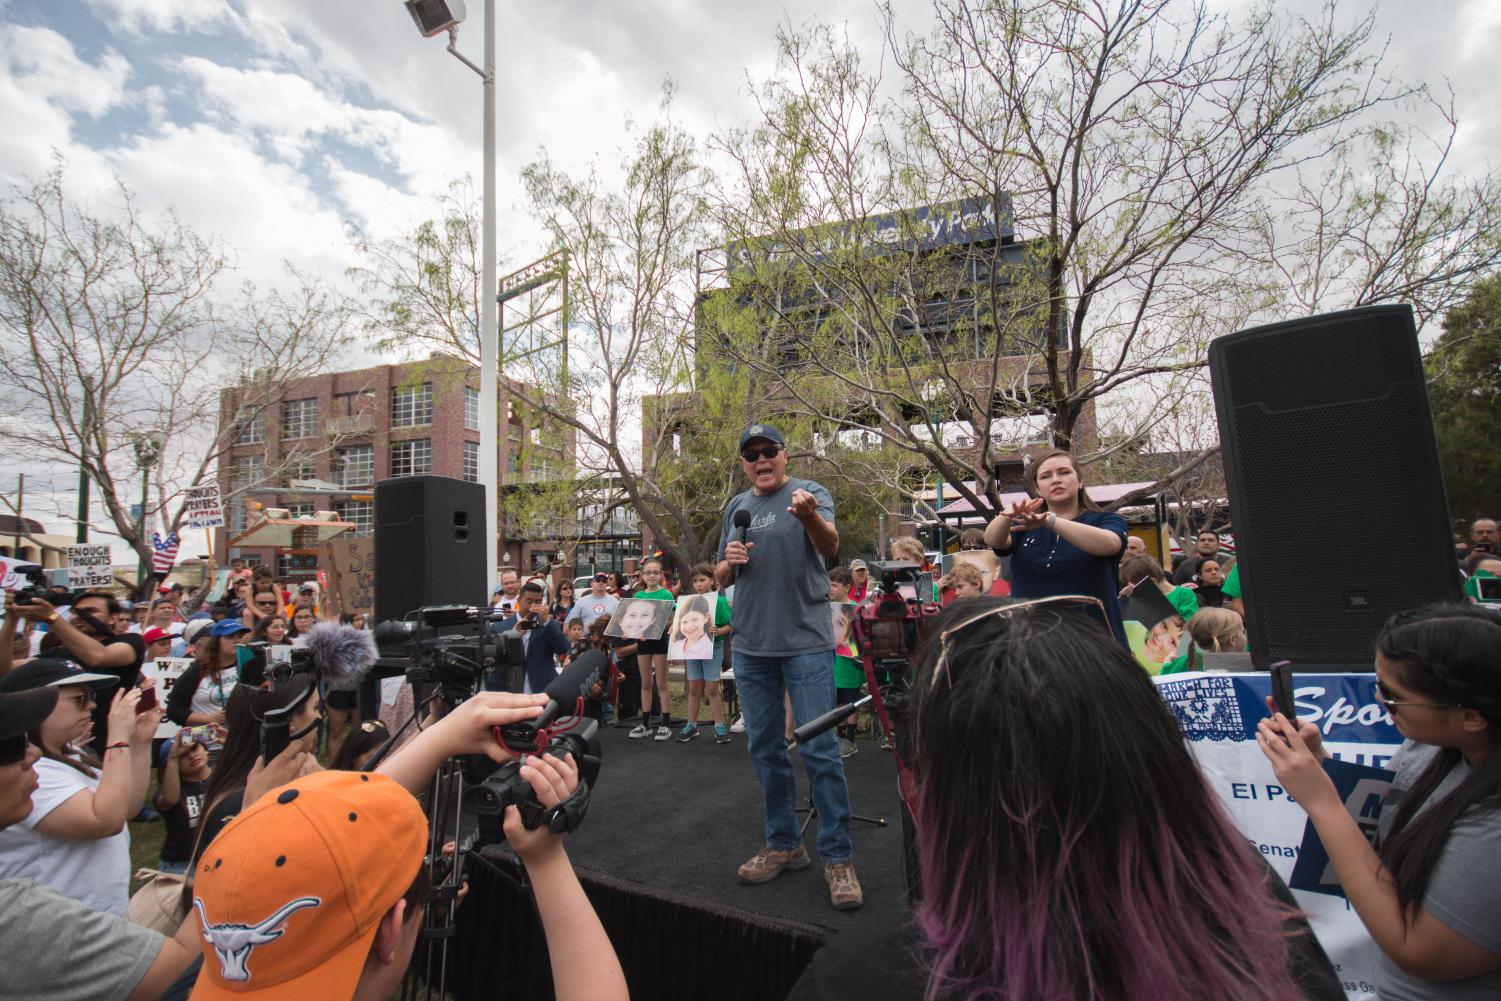 March+For+Our+Lives+rally+takes+over+downtown+El+Paso